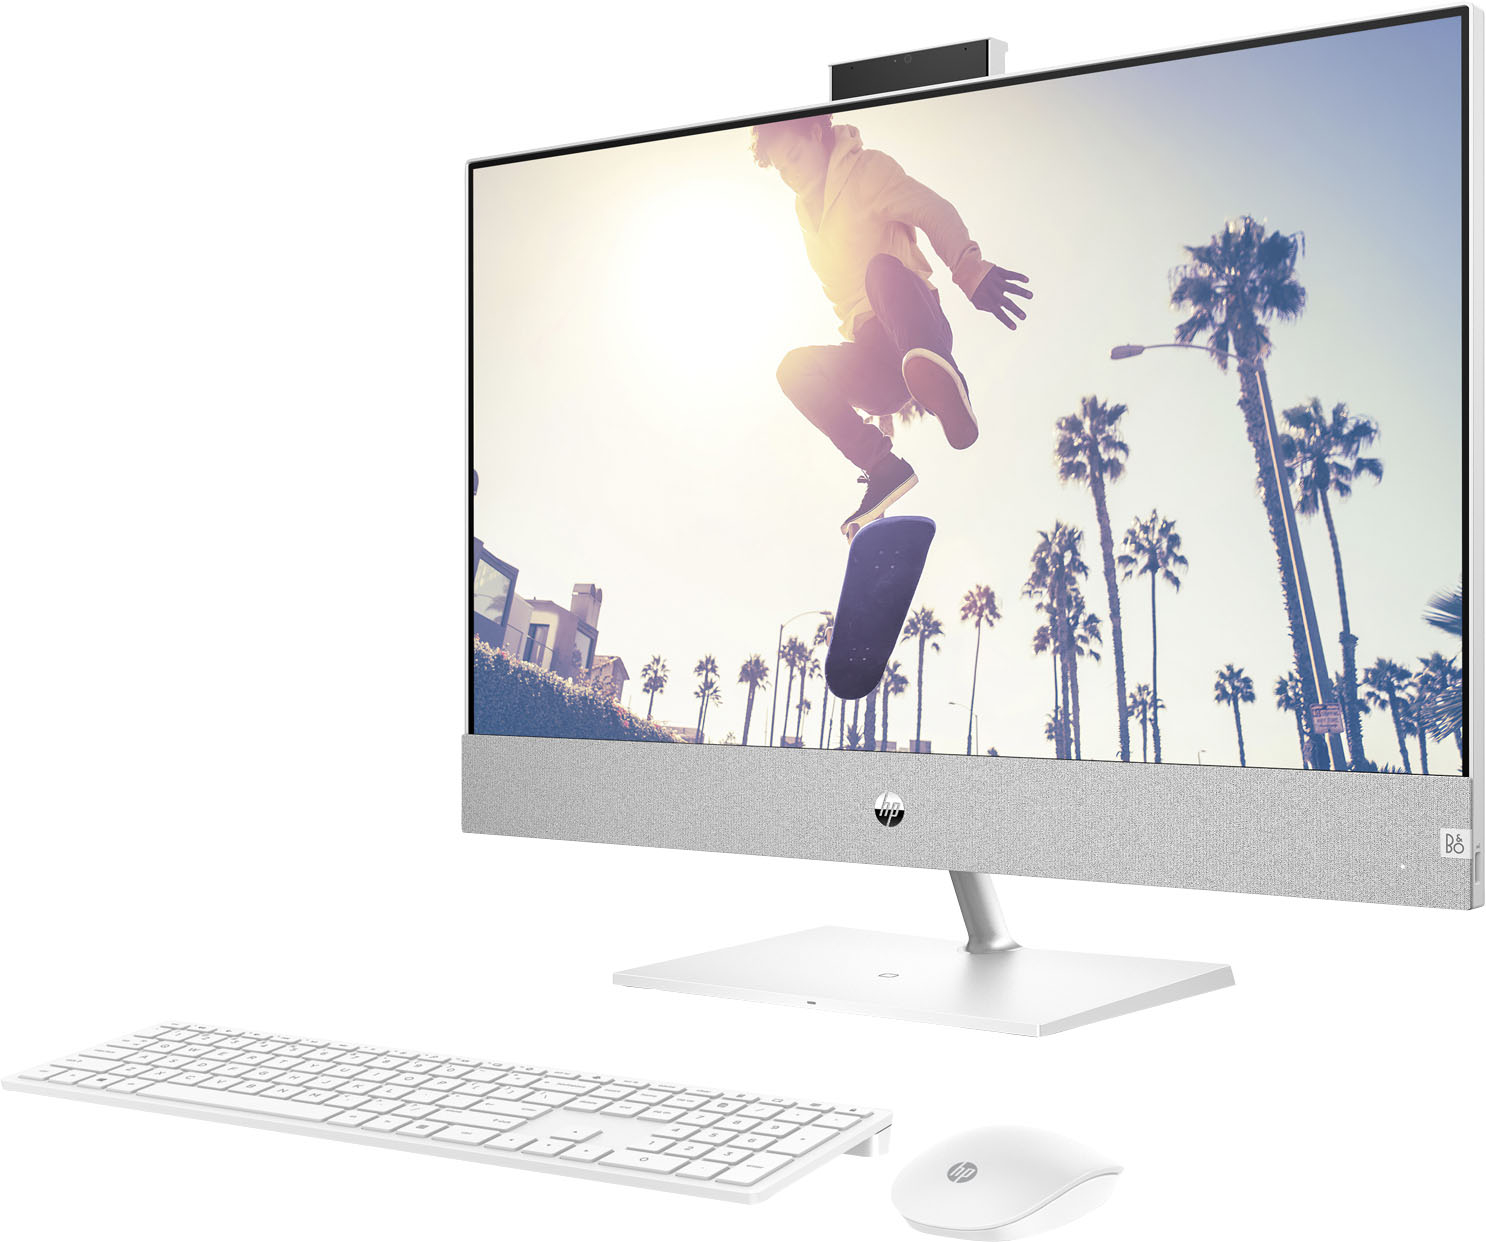 HP Pavilion 27 Touch Desktop 10TB SSD 32GB RAM Extreme (AMD Ryzen  Processor with Cores and Max Boost 4.30GHz, 32 GB RAM, 10 TB SSD, 27-inch  FullHD